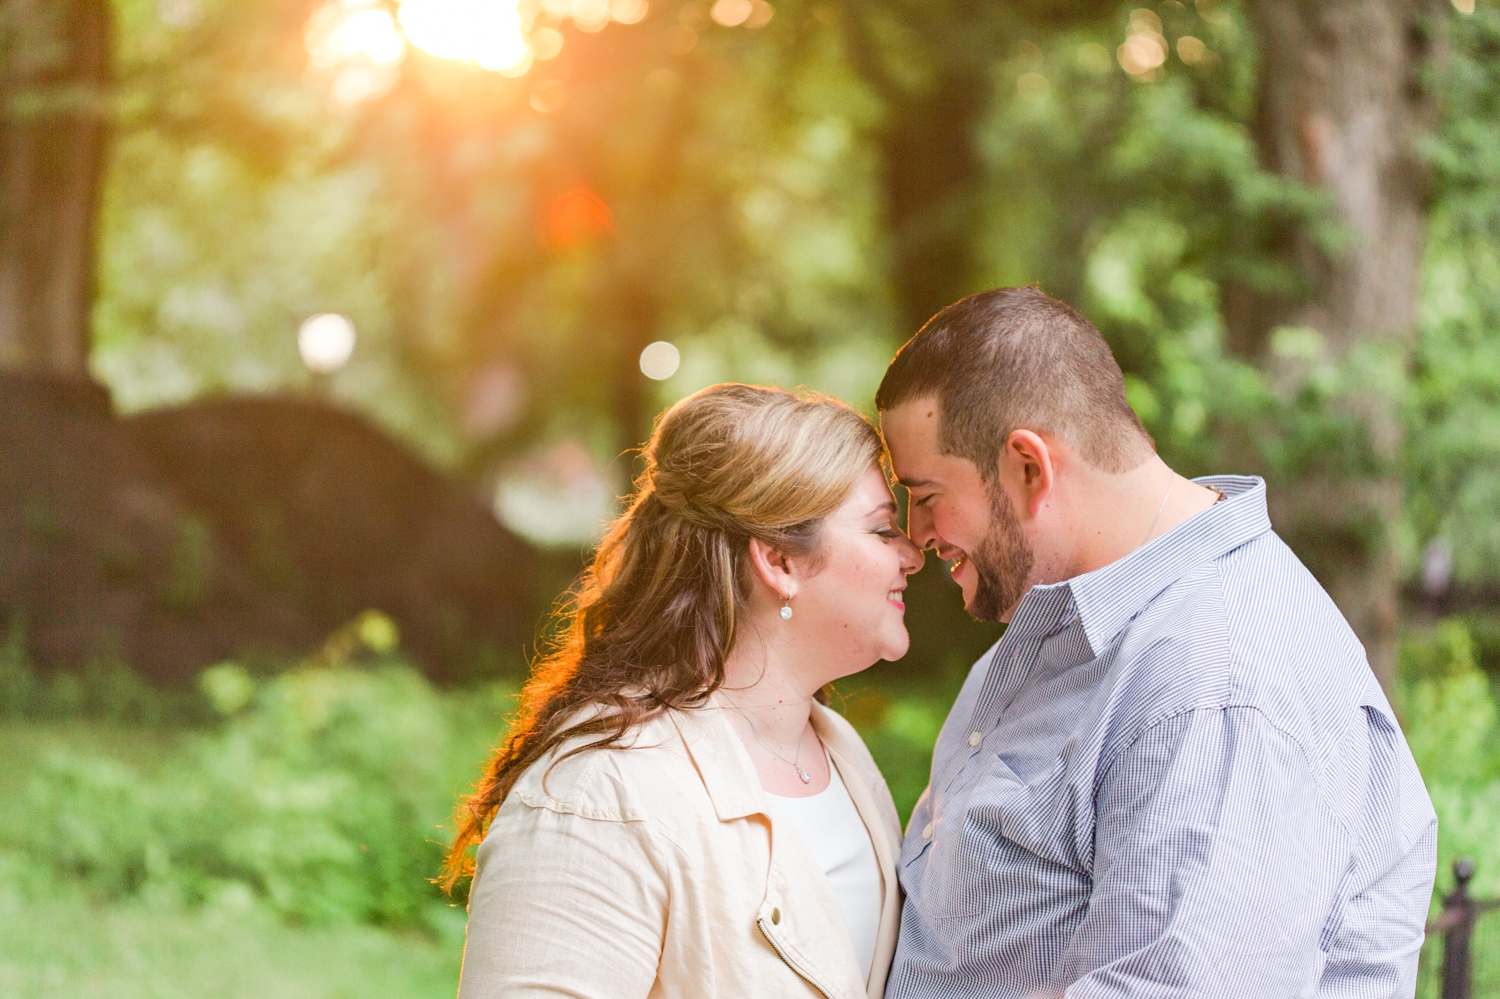 central-park-engagement-session-top-ct-nyc-wedding-photographer-shaina-lee-photography-photo